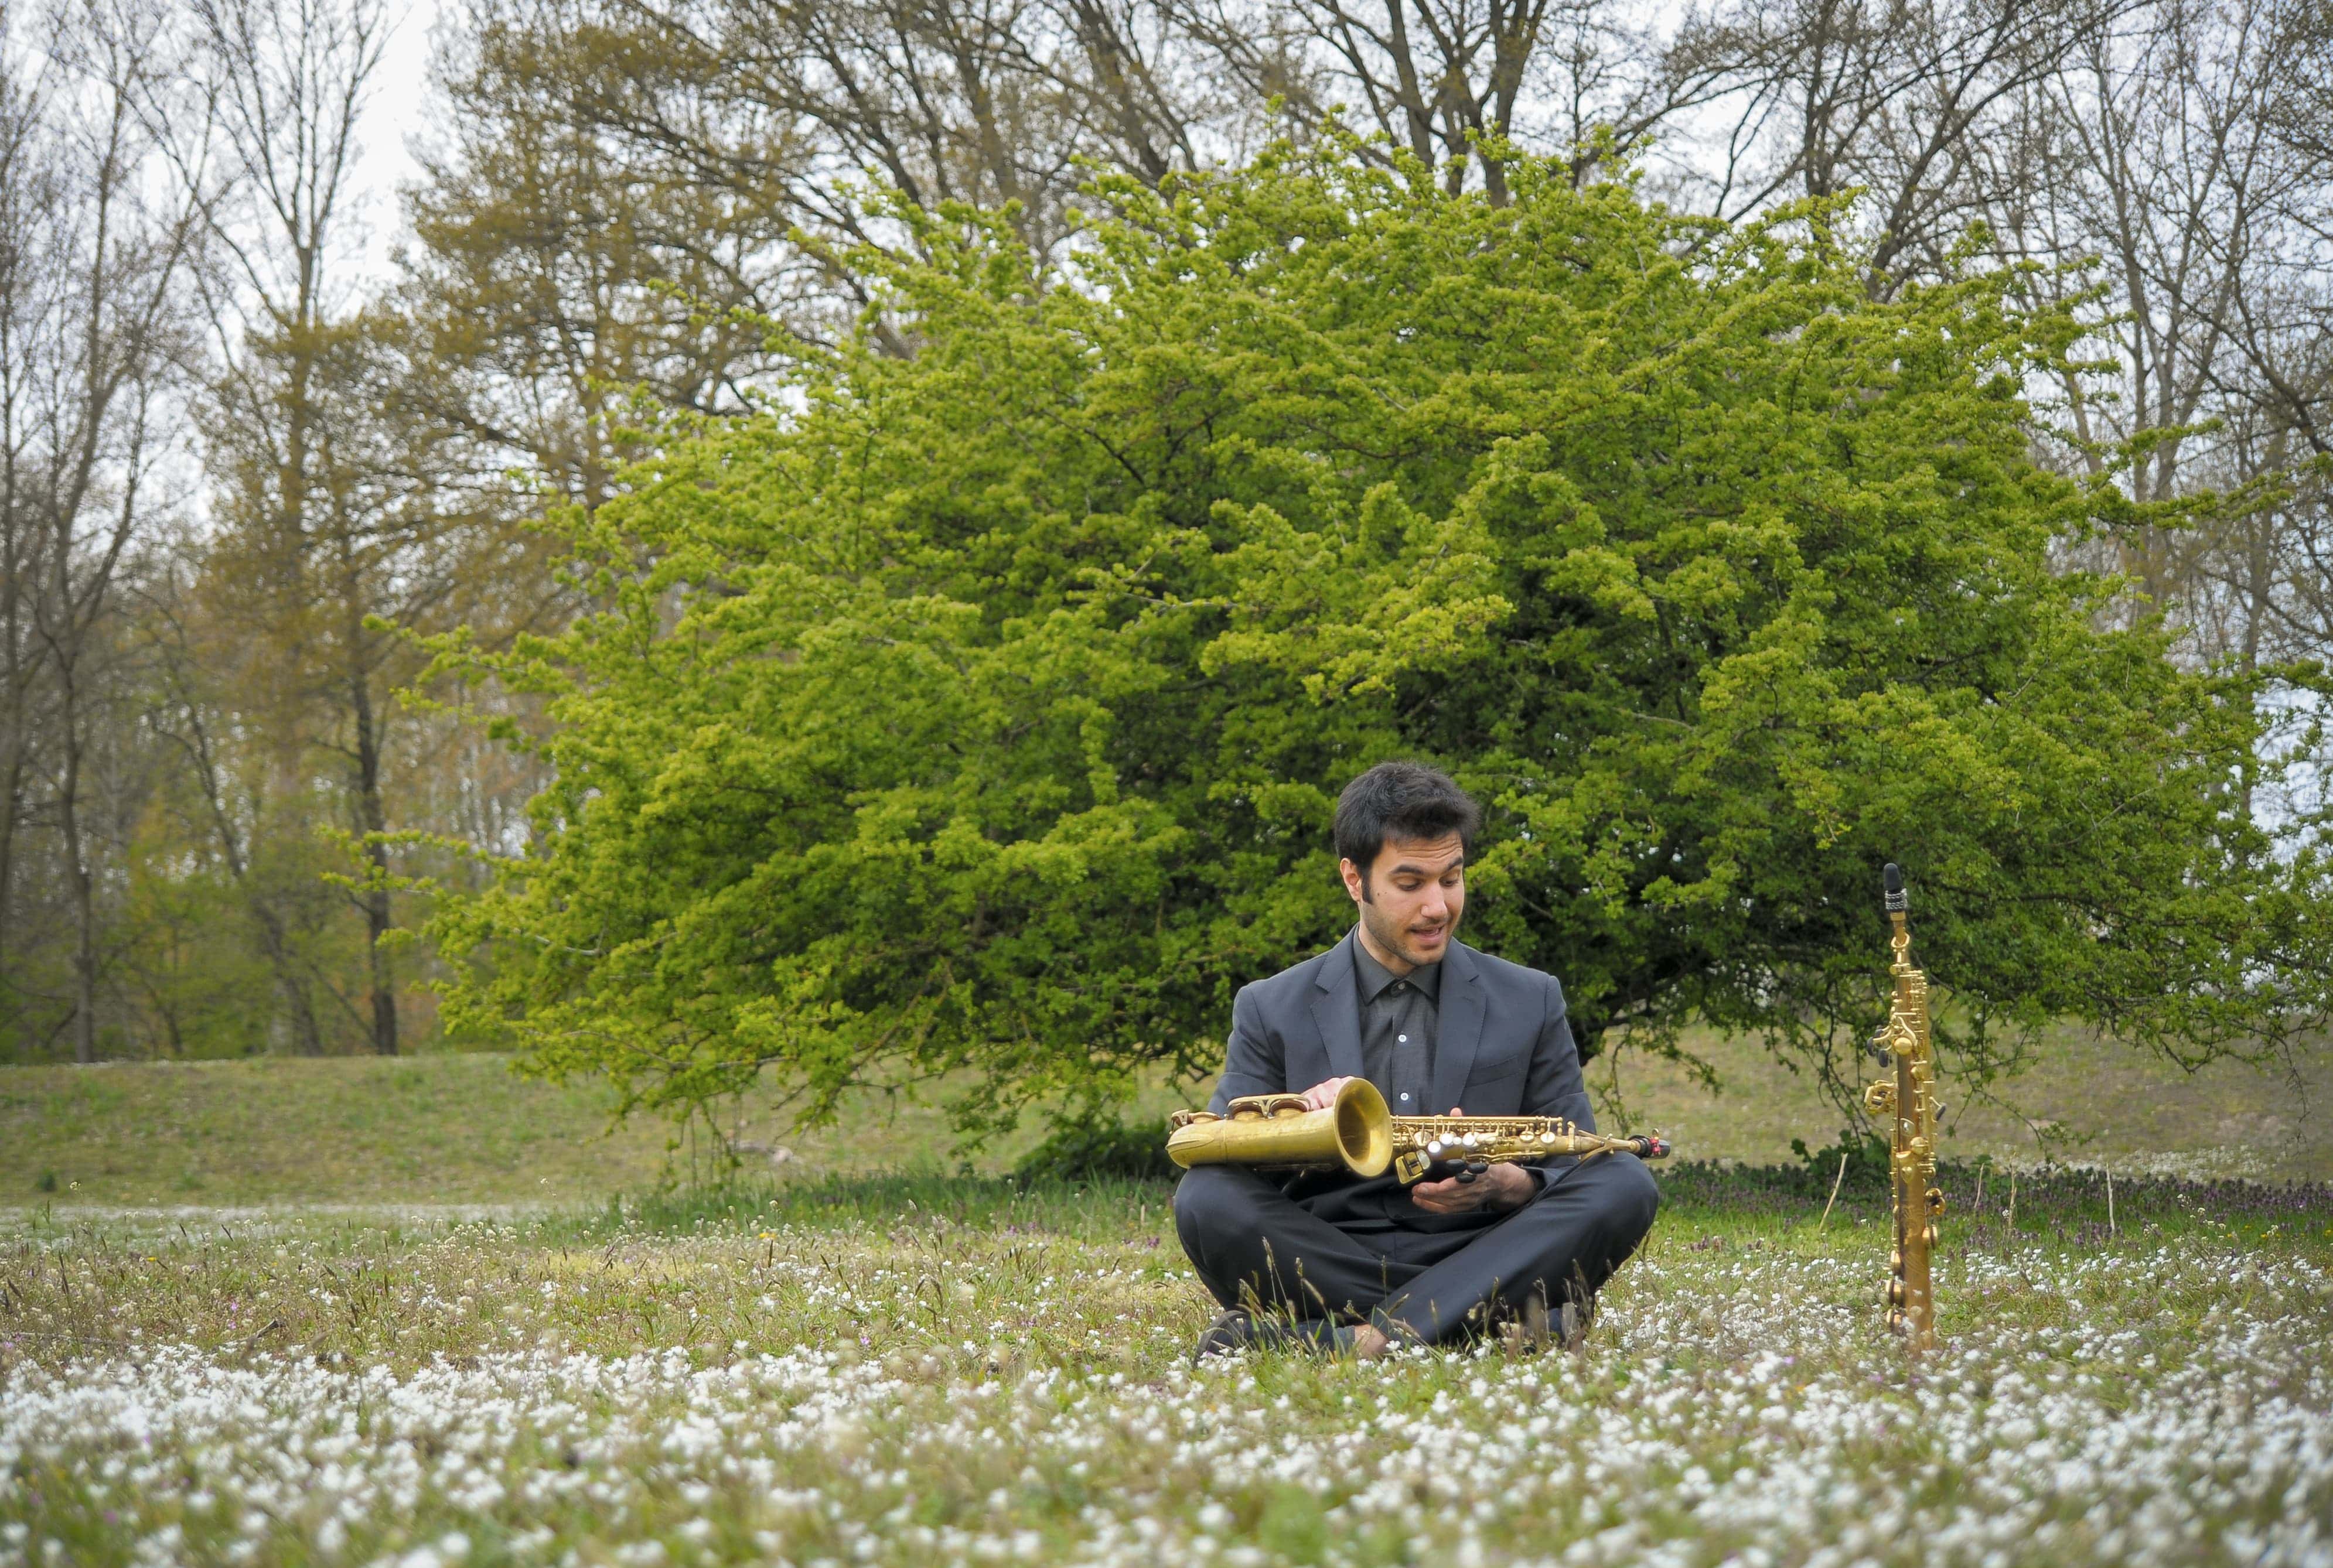 the artist sitting on the grass with his saxophone